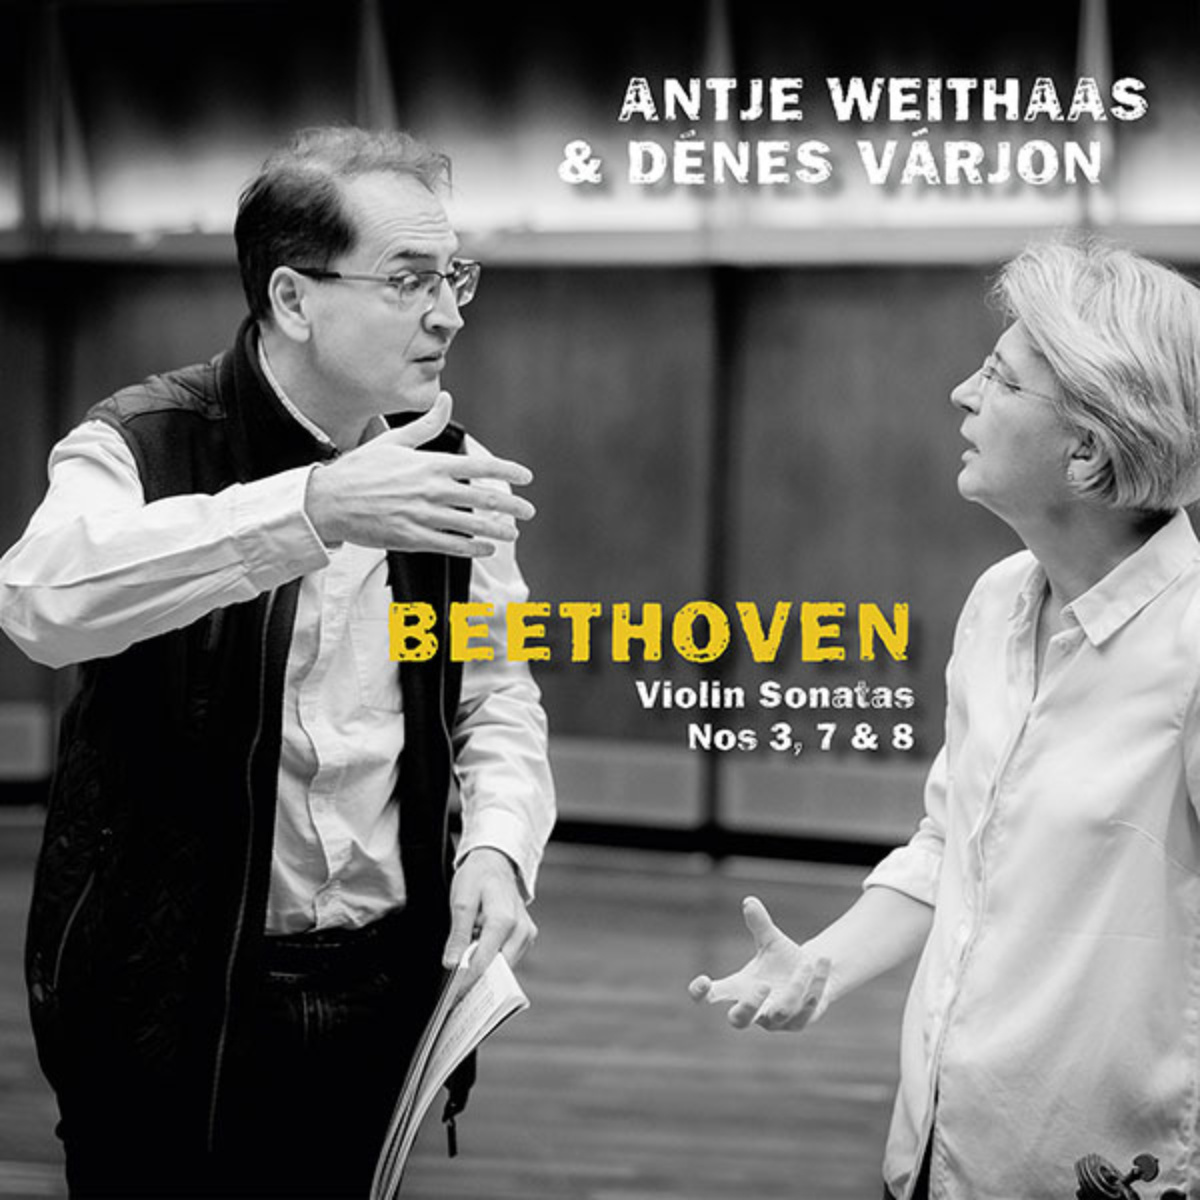 Antje Weithaas's new Beethoven CD